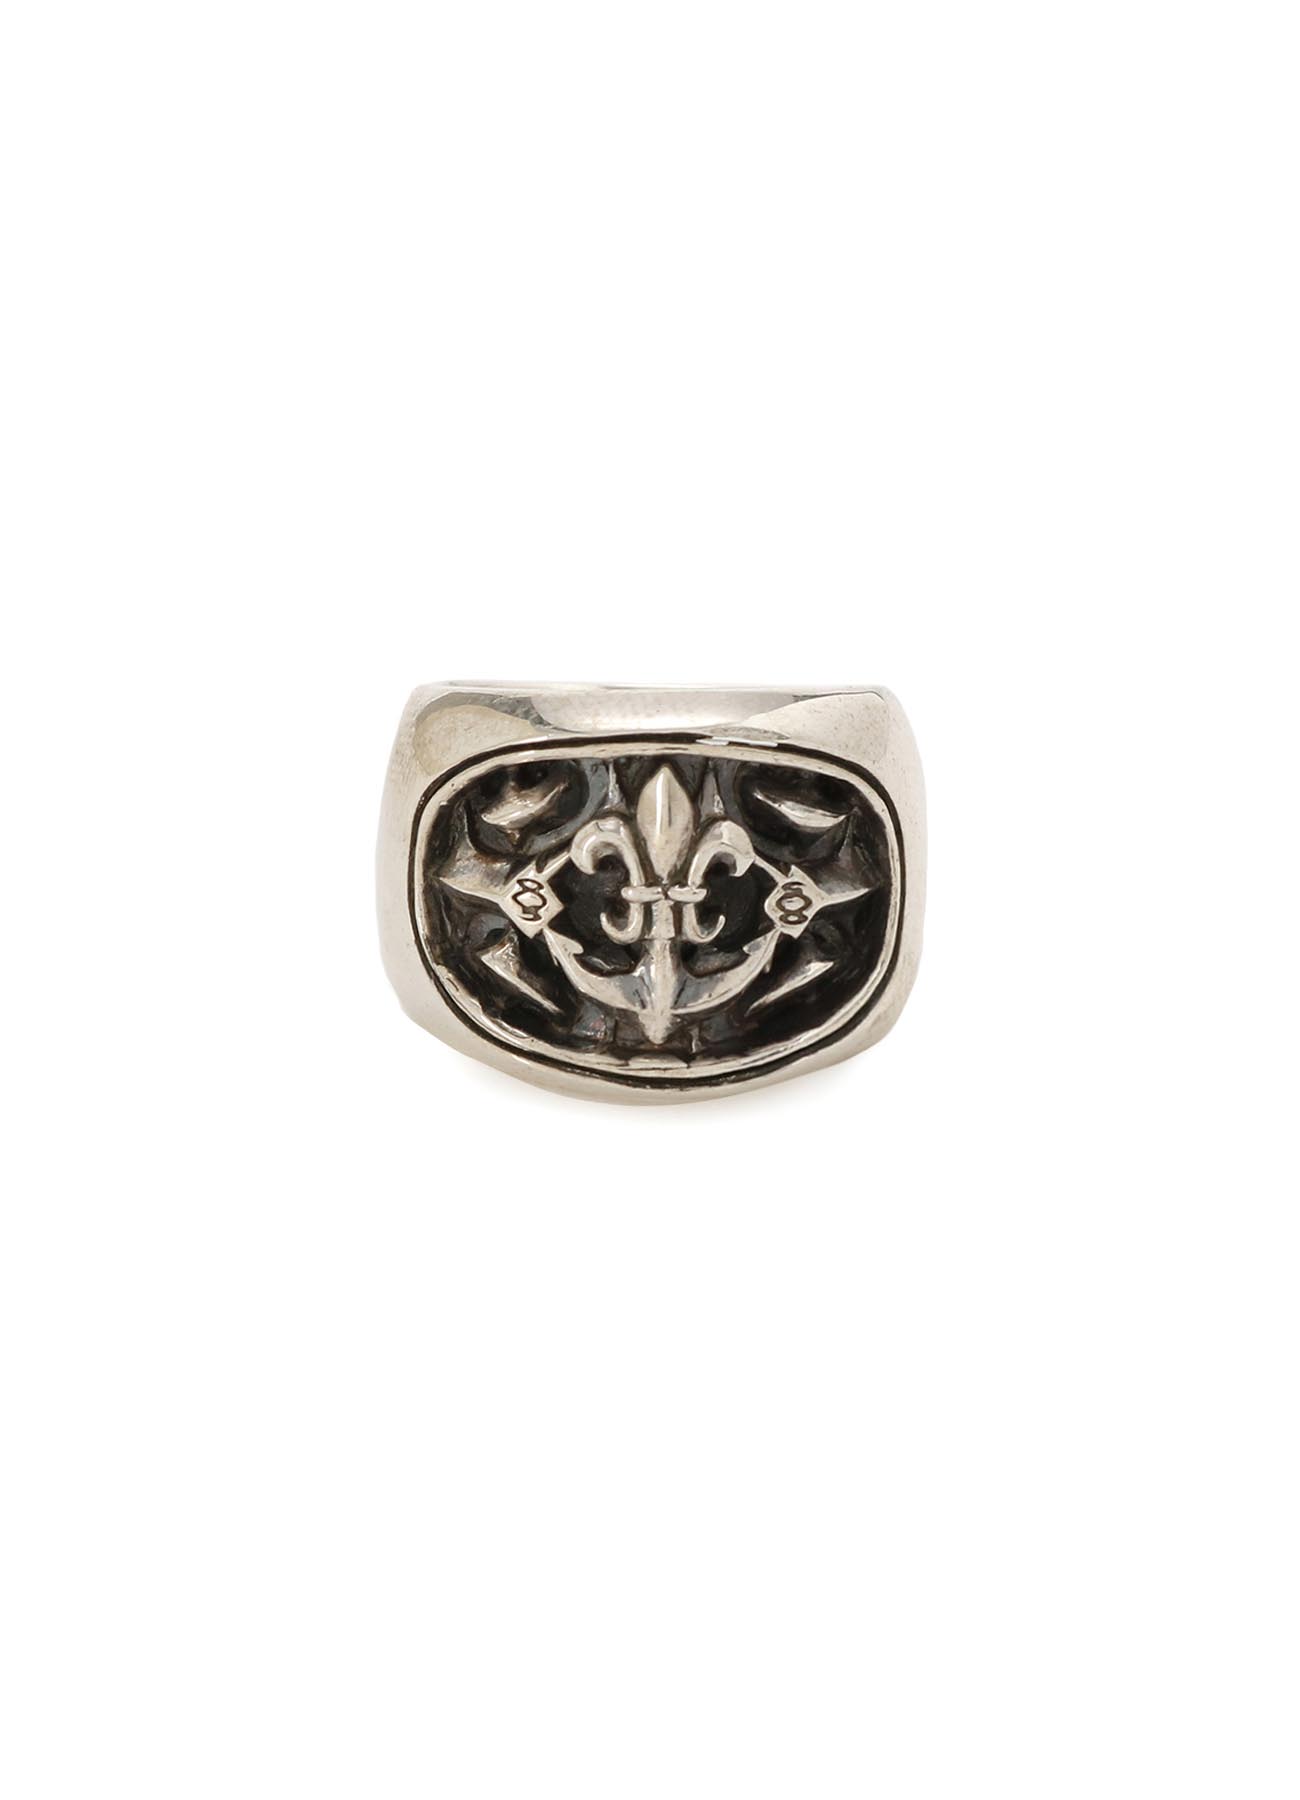 SILVER 950 LILY-ANCHOR OVAL RING